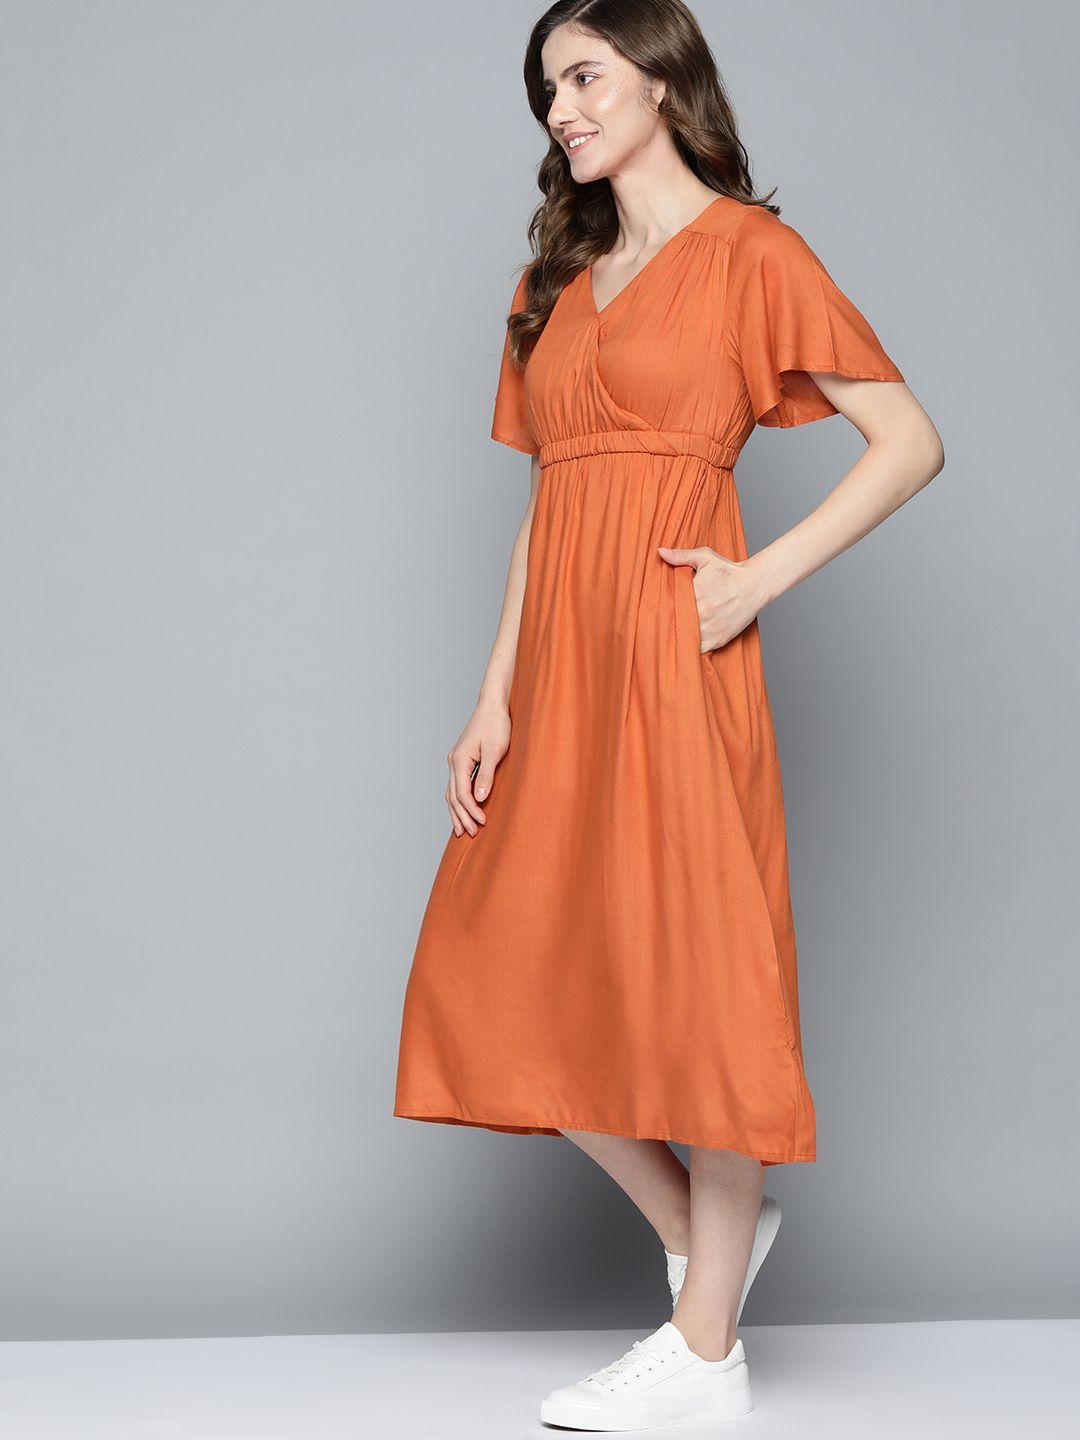 m&h our water rust orange solid midi wrap dress